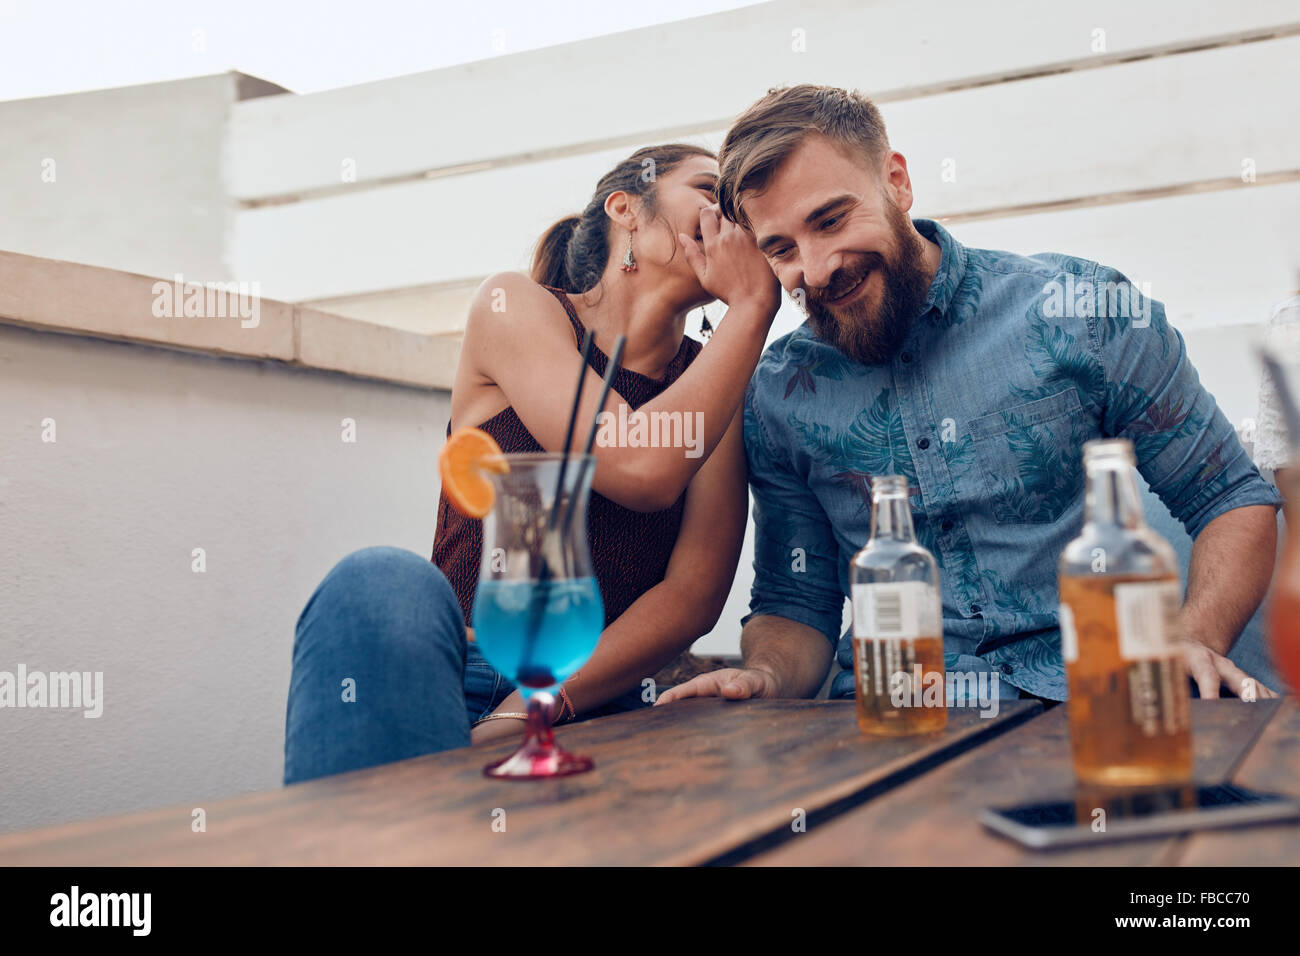 Two young people sitting together gossiping. Woman whispering something in man's ears during a party. Stock Photo